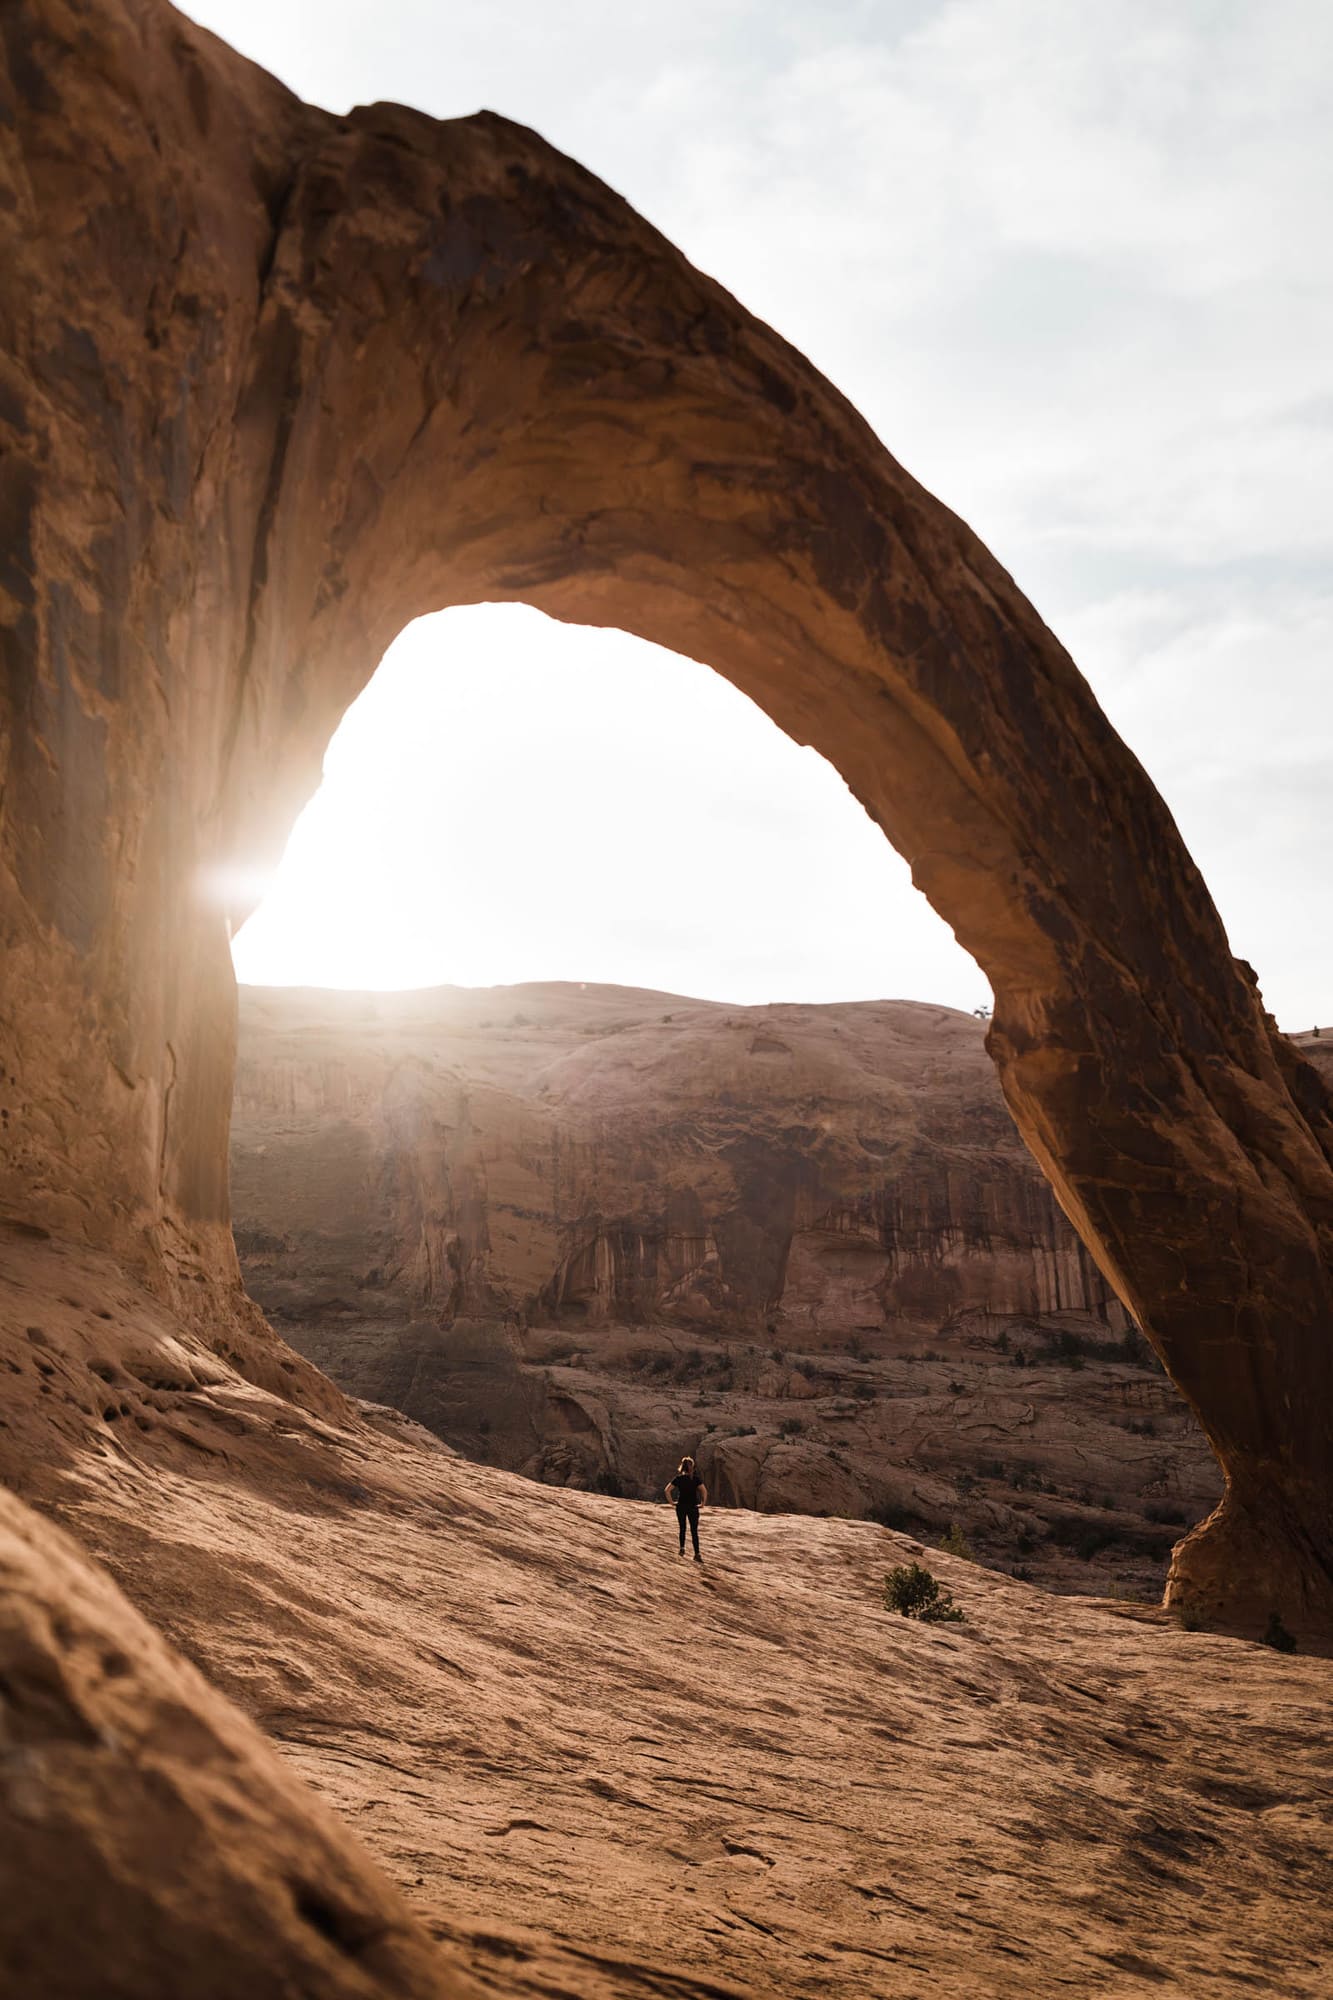 You have to consider these six epic places to elope in Utah! If you love the desert vibes and are curious where you could tie the knot read this.